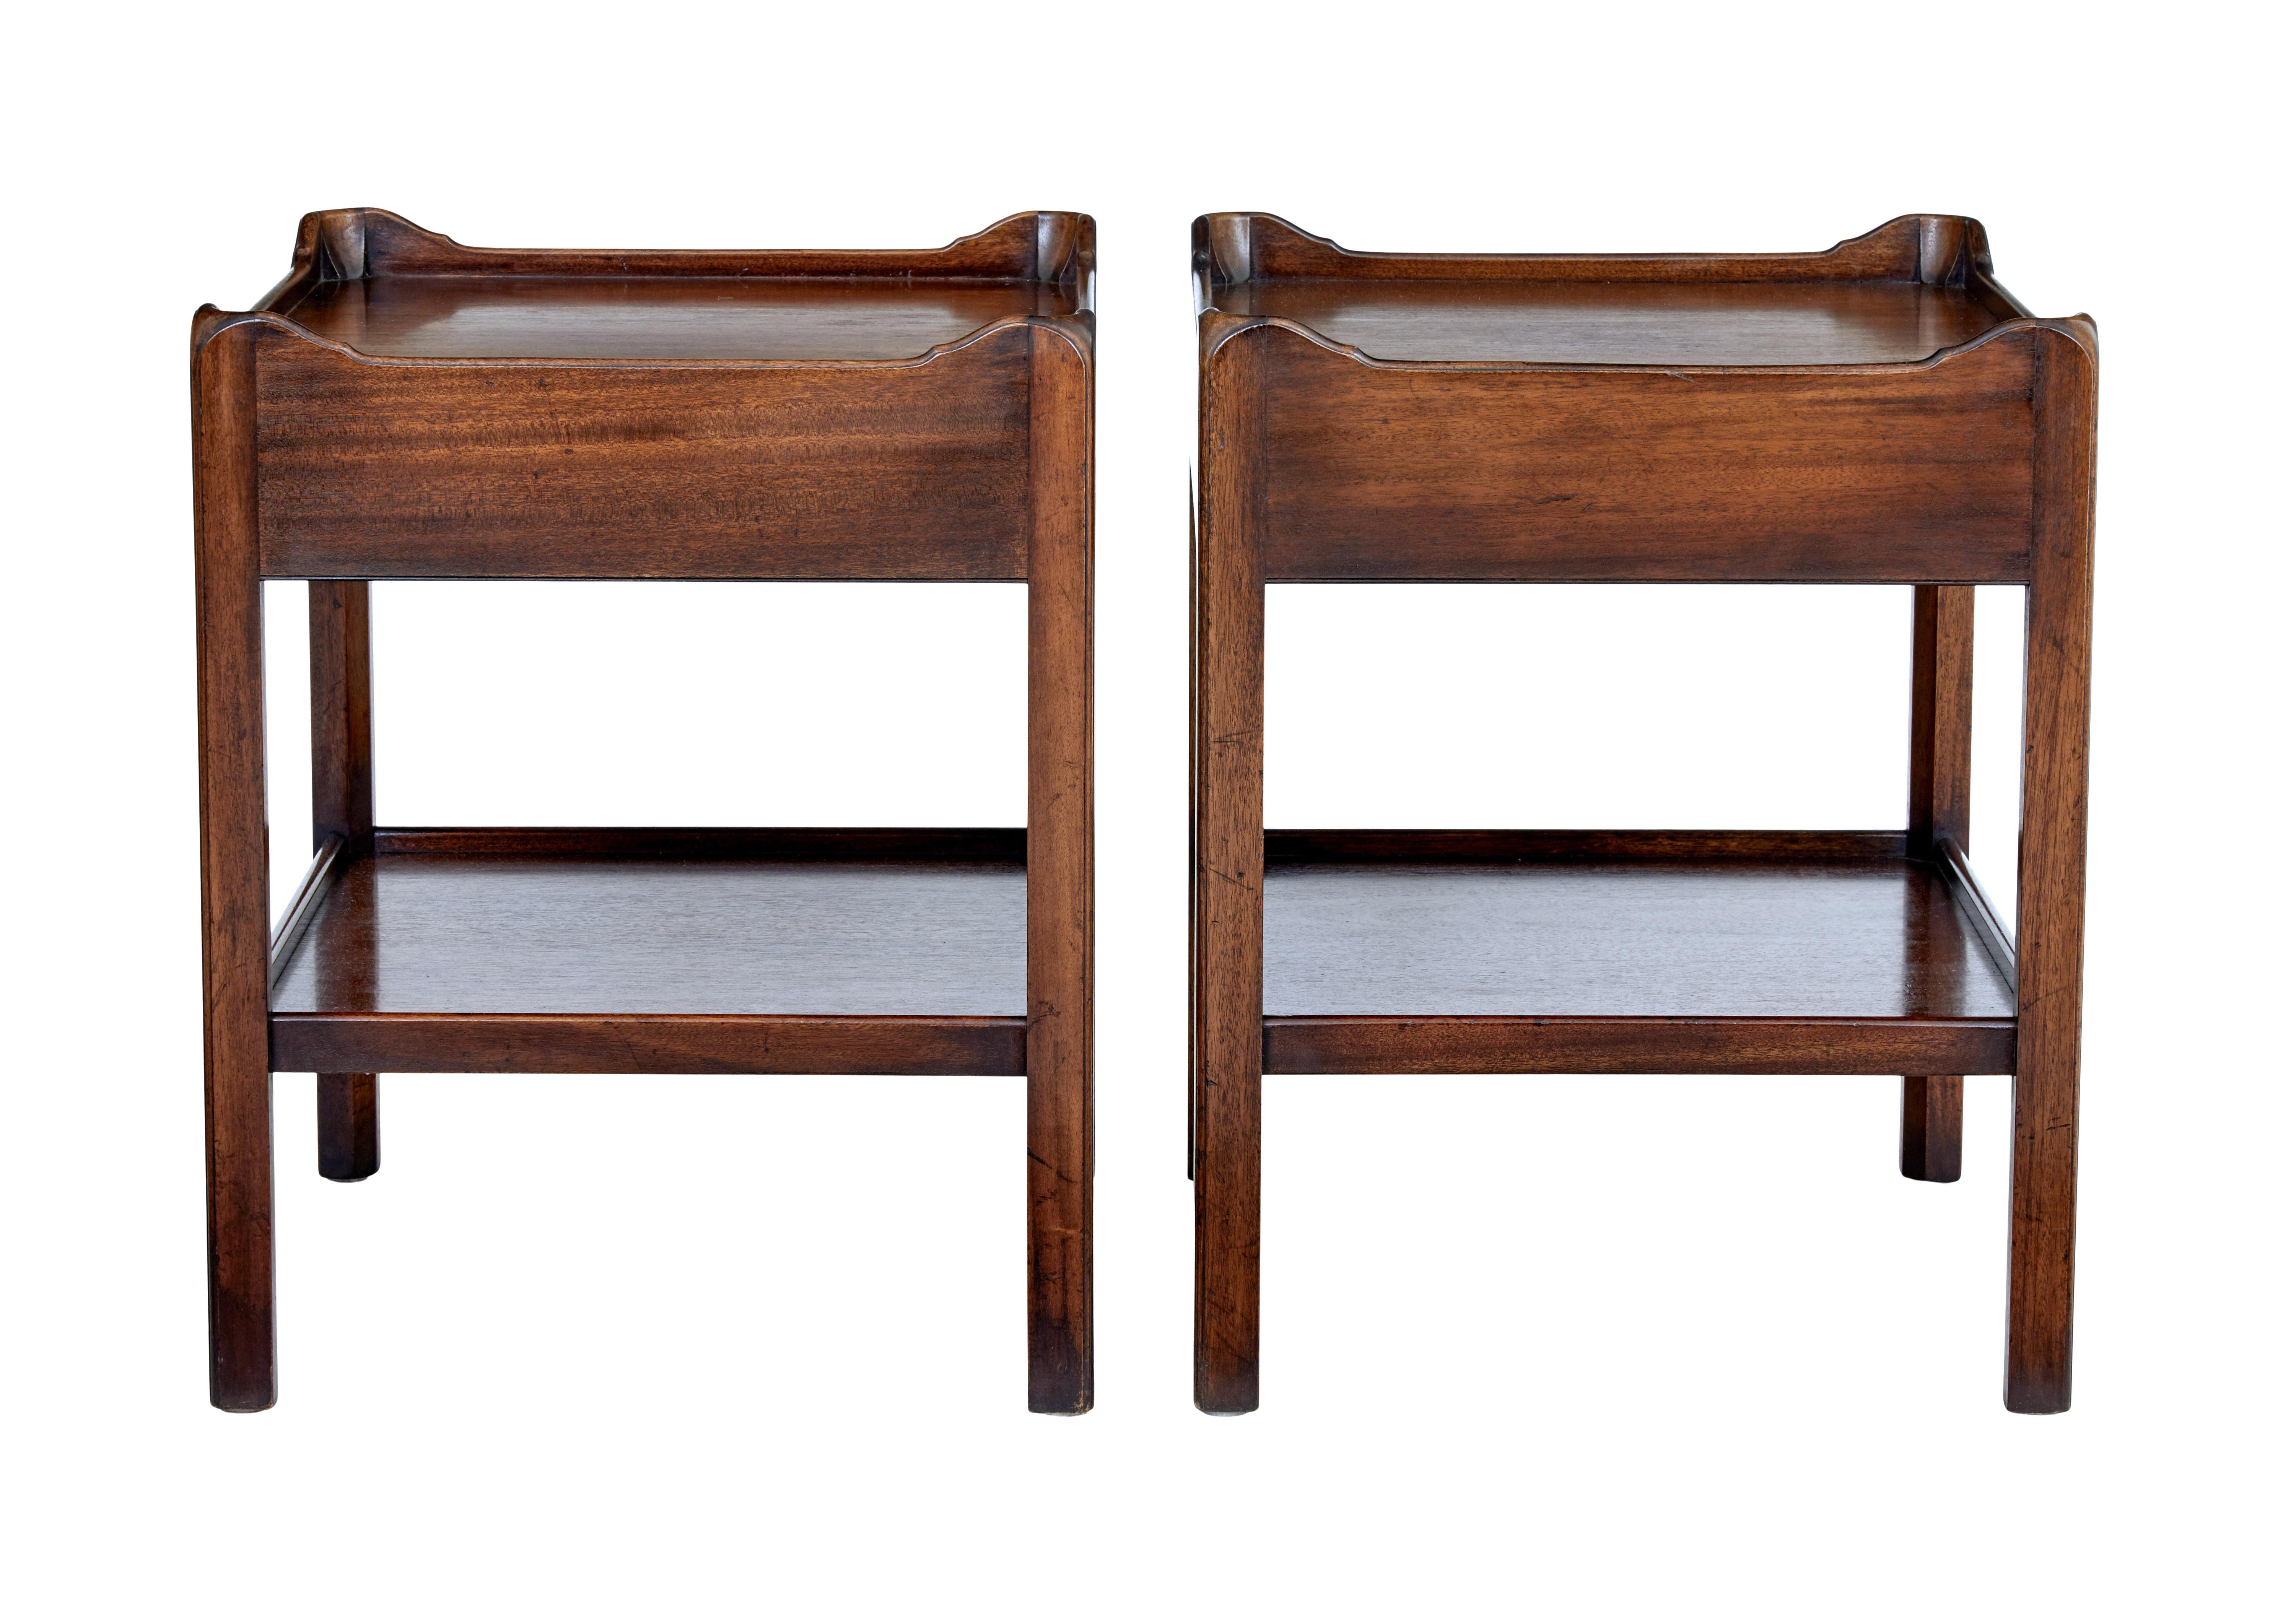 Hand-Crafted Pair of 20th Century Georgian Design Mahogany Side Tables